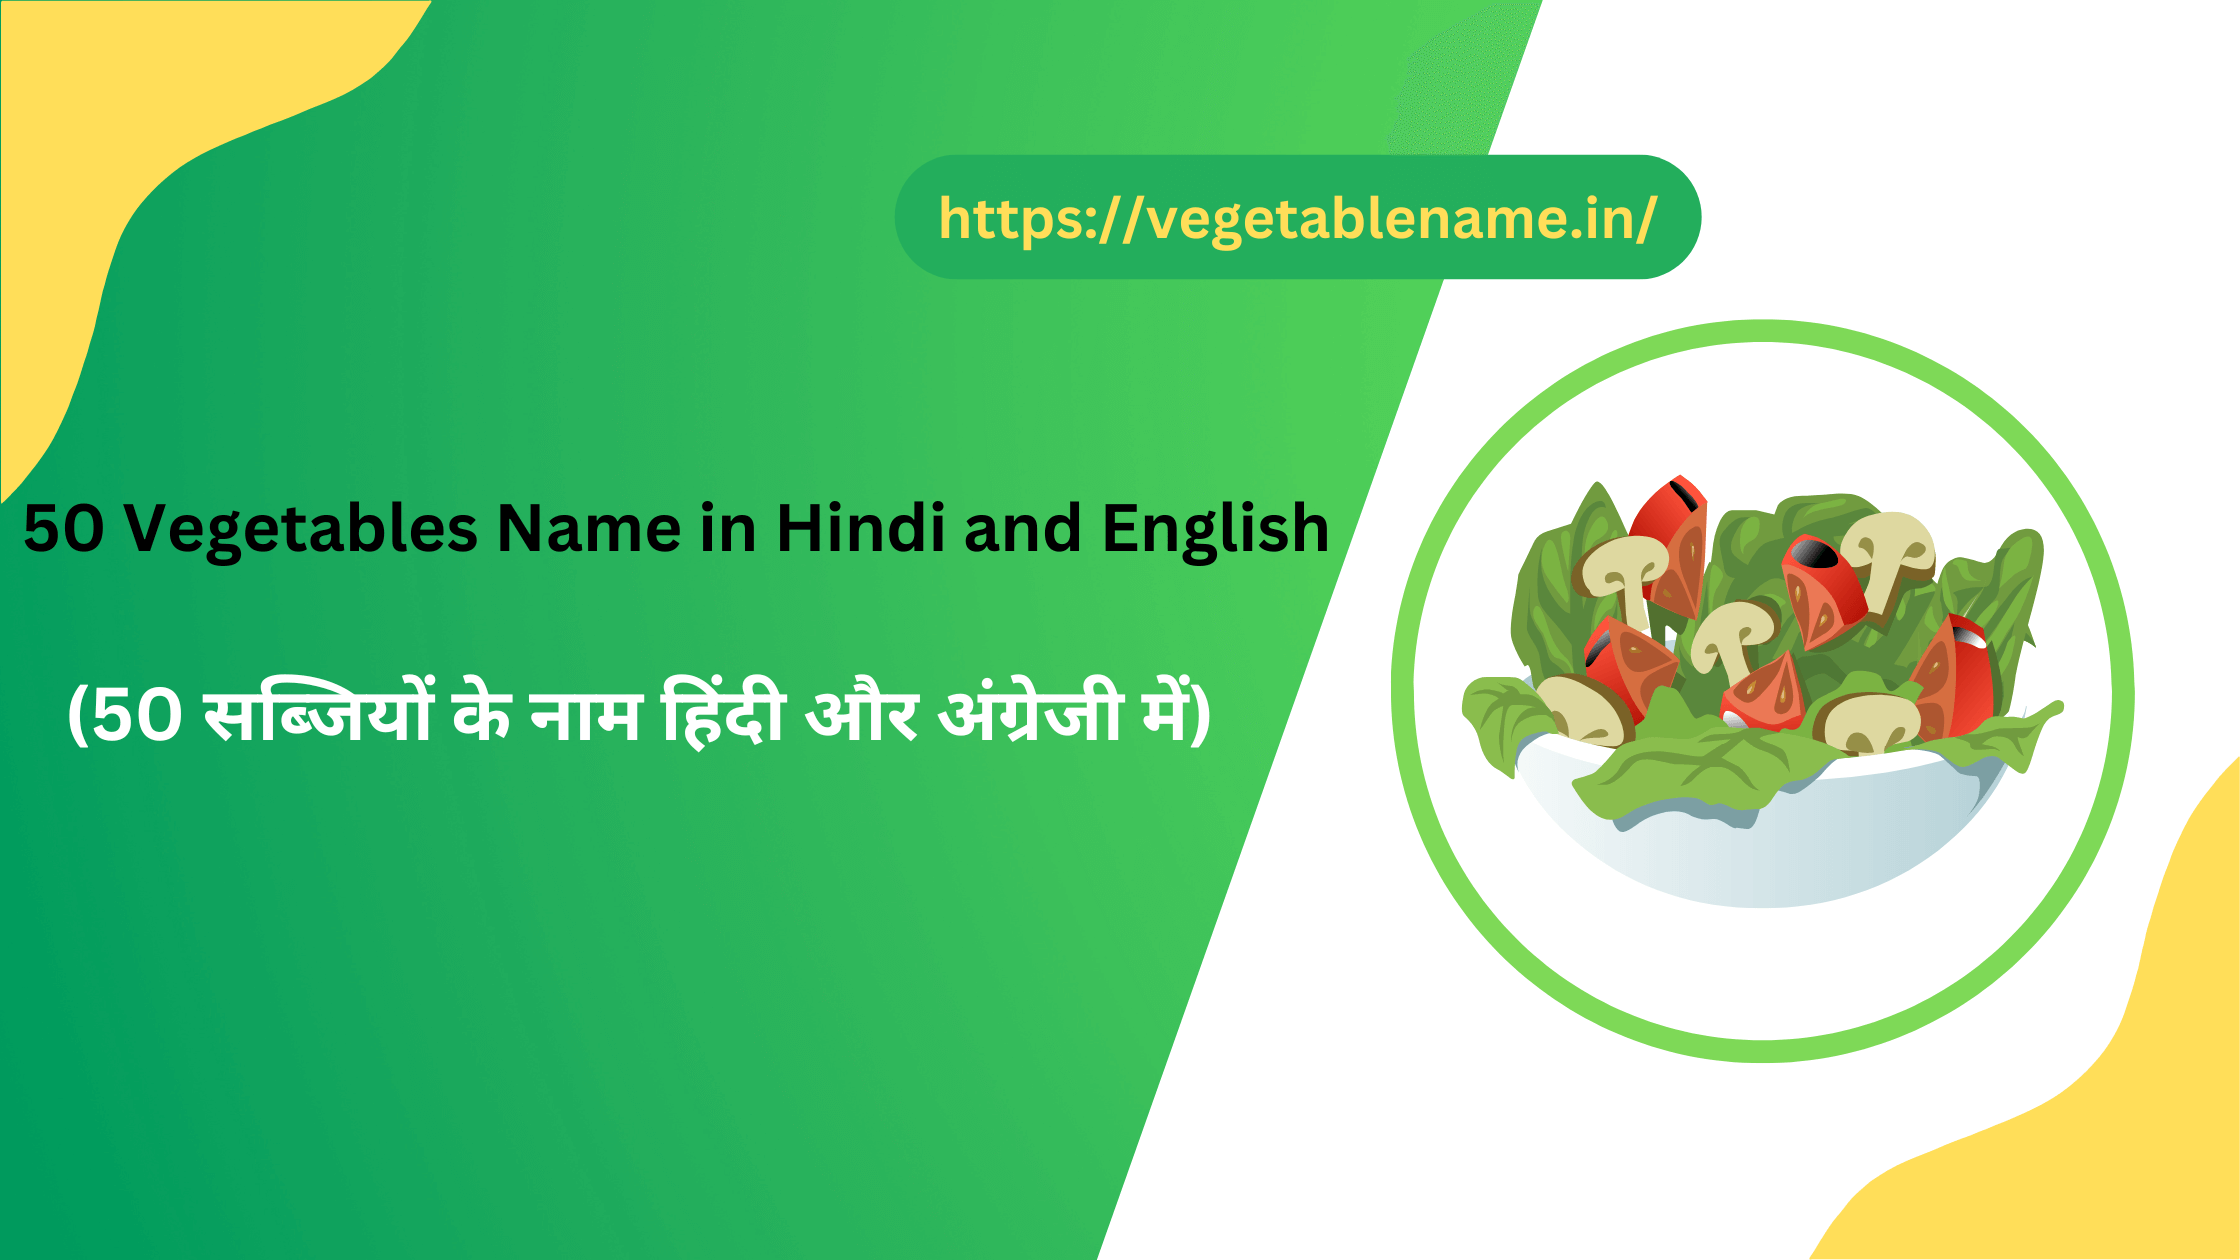 50 vegetables name in Hindi and English